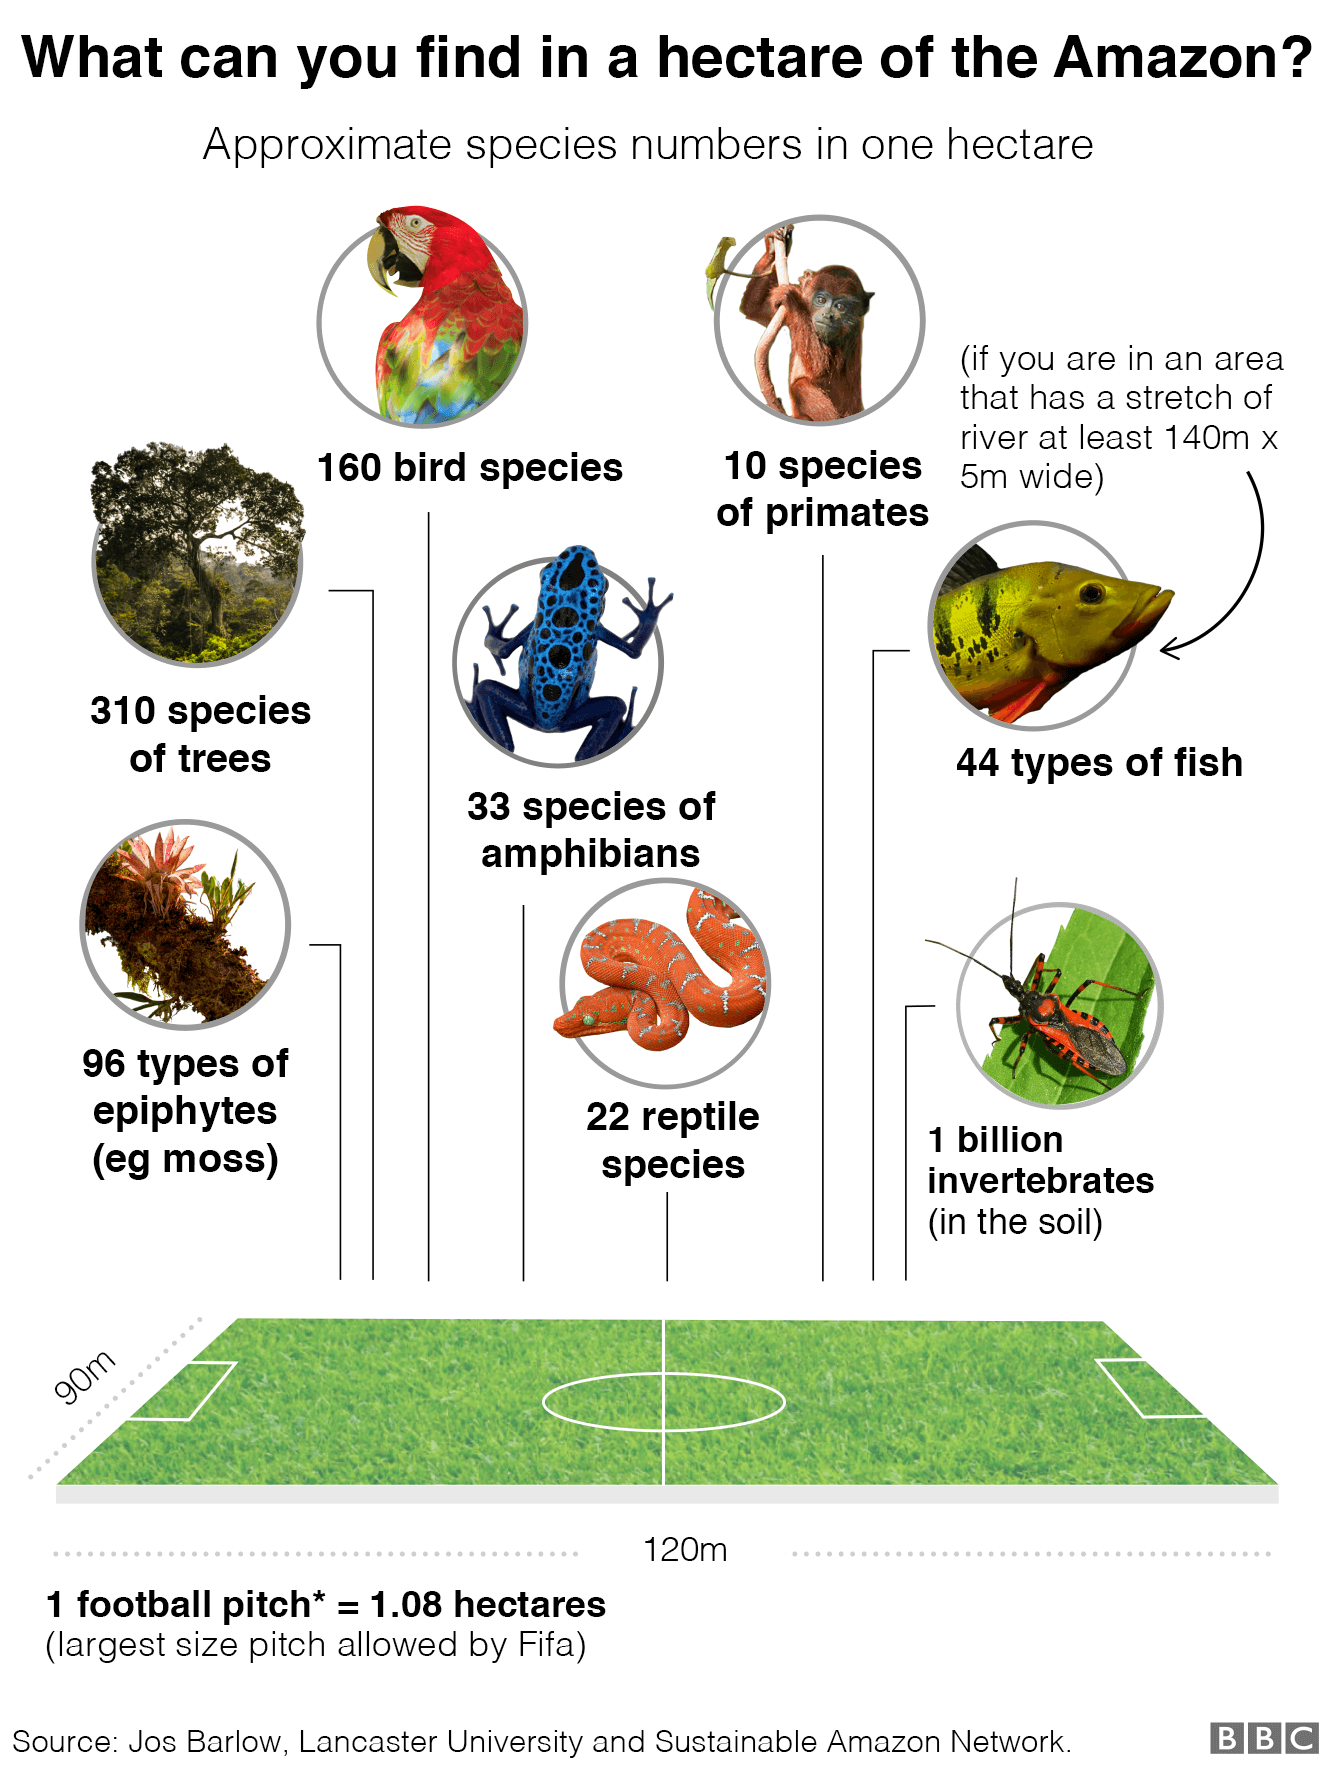 Graphic showing the species it is possible to find in one hectare of the Amazon: 160 bird species, 10 primate species, 44 types of fish if you are in an area that has a stretch of river at least 140m by 5m wide, 33 species of amphibians, 22 reptile species, 96 types of epiphytes (eg moss) and 310 species of trees